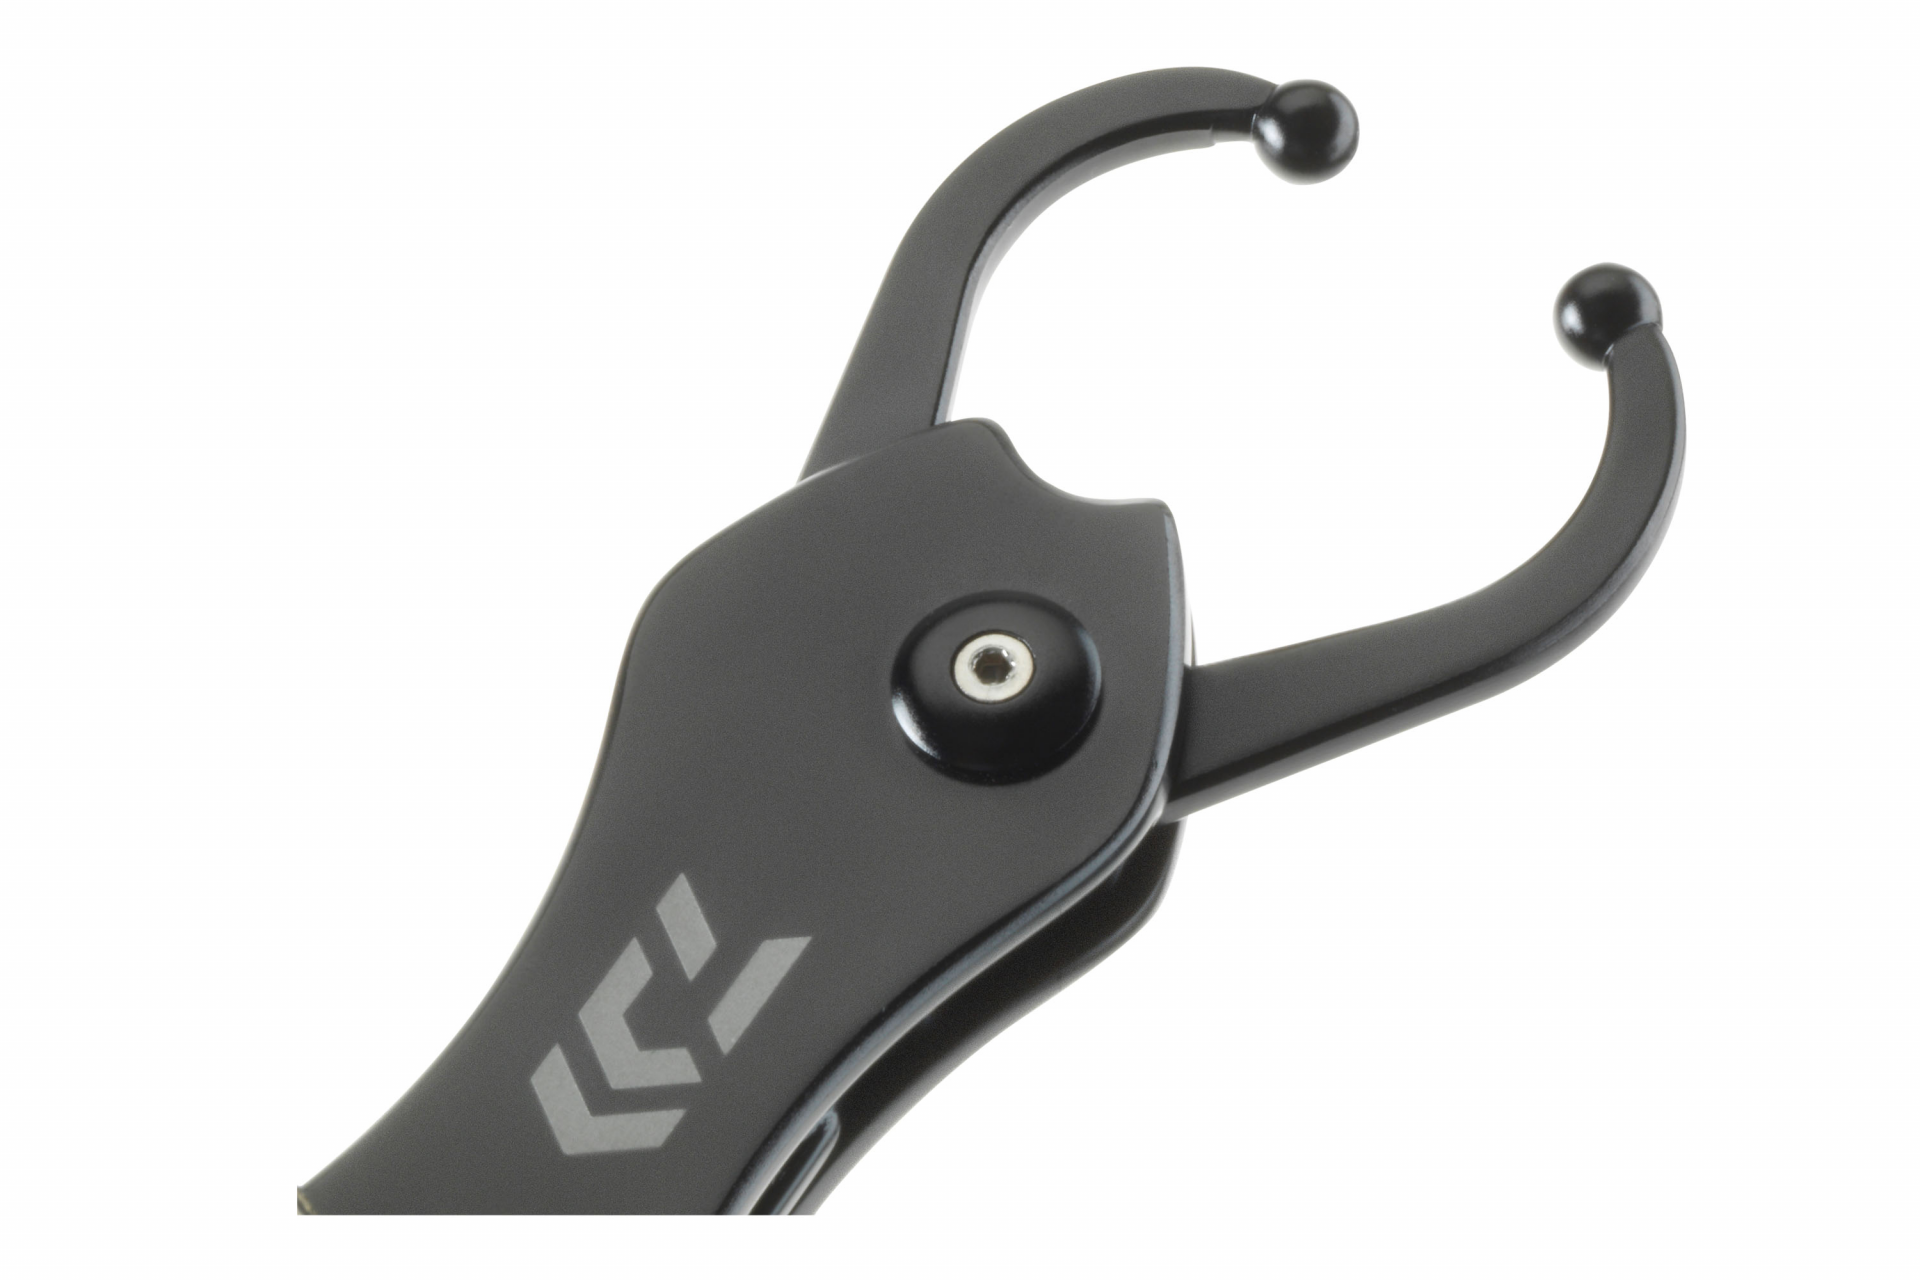 Prorex "Fish-Lip" Grip <span>| Landing pliers | with integrated scale</span>